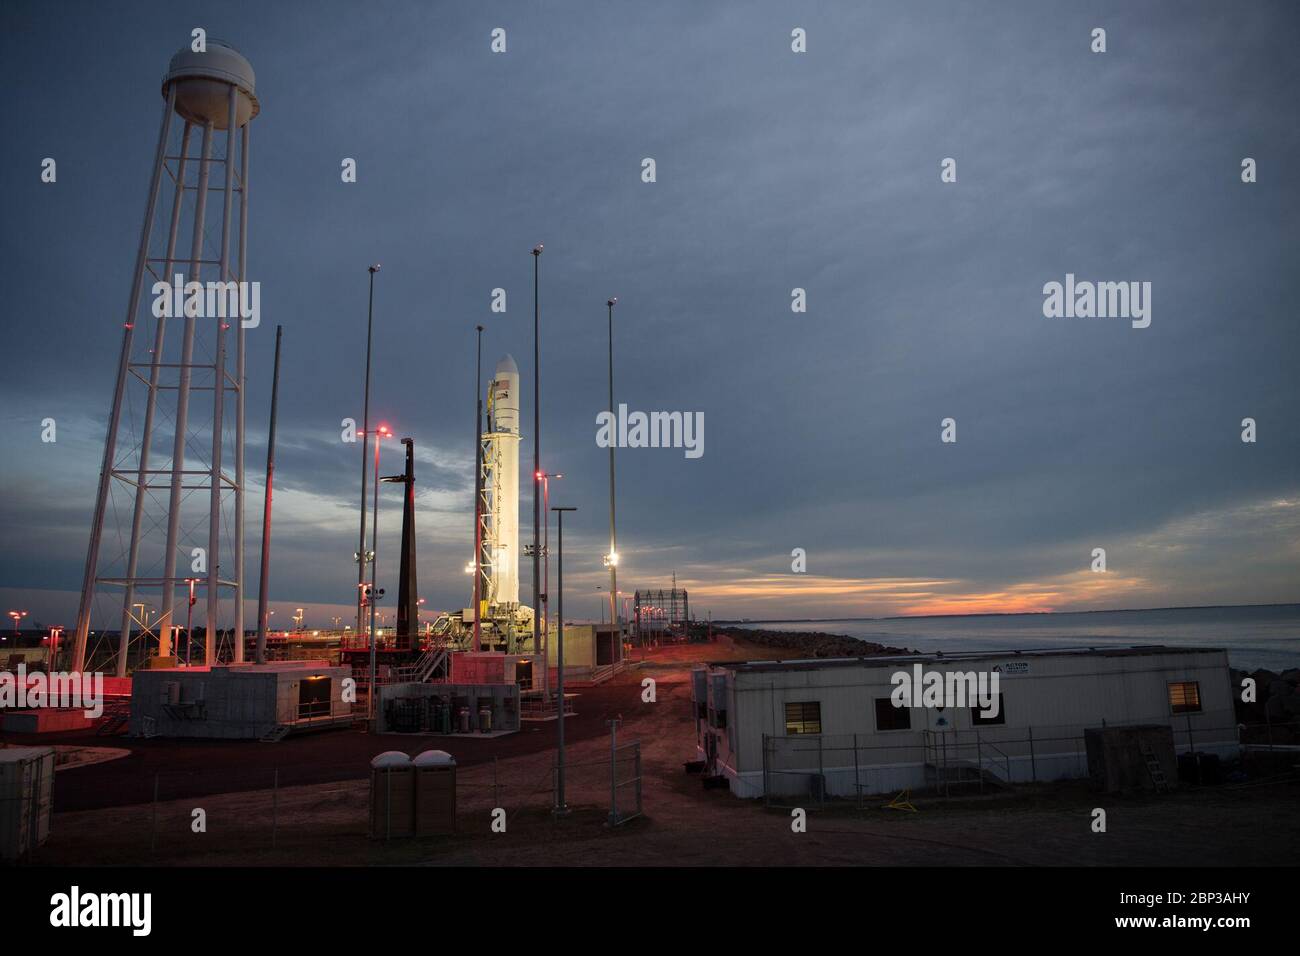 Northrop Grumman Antares CRS-13 Prelaunch  A Northrop Grumman Antares rocket carrying a Cygnus resupply spacecraft is seen at sunrise on Pad-0A, Friday, Feb. 14, 2020, at NASA's Wallops Flight Facility in Virginia. Northrop Grumman’s 13th contracted cargo resupply mission with NASA to the International Space Station will deliver more than 7,500 pounds of science and research, crew supplies and vehicle hardware to the orbital laboratory and its crew. The CRS-13 Cygnus spacecraft is named after the first African American astronaut, Major Robert Henry Lawrence Jr., and is scheduled to launch at 3 Stock Photo